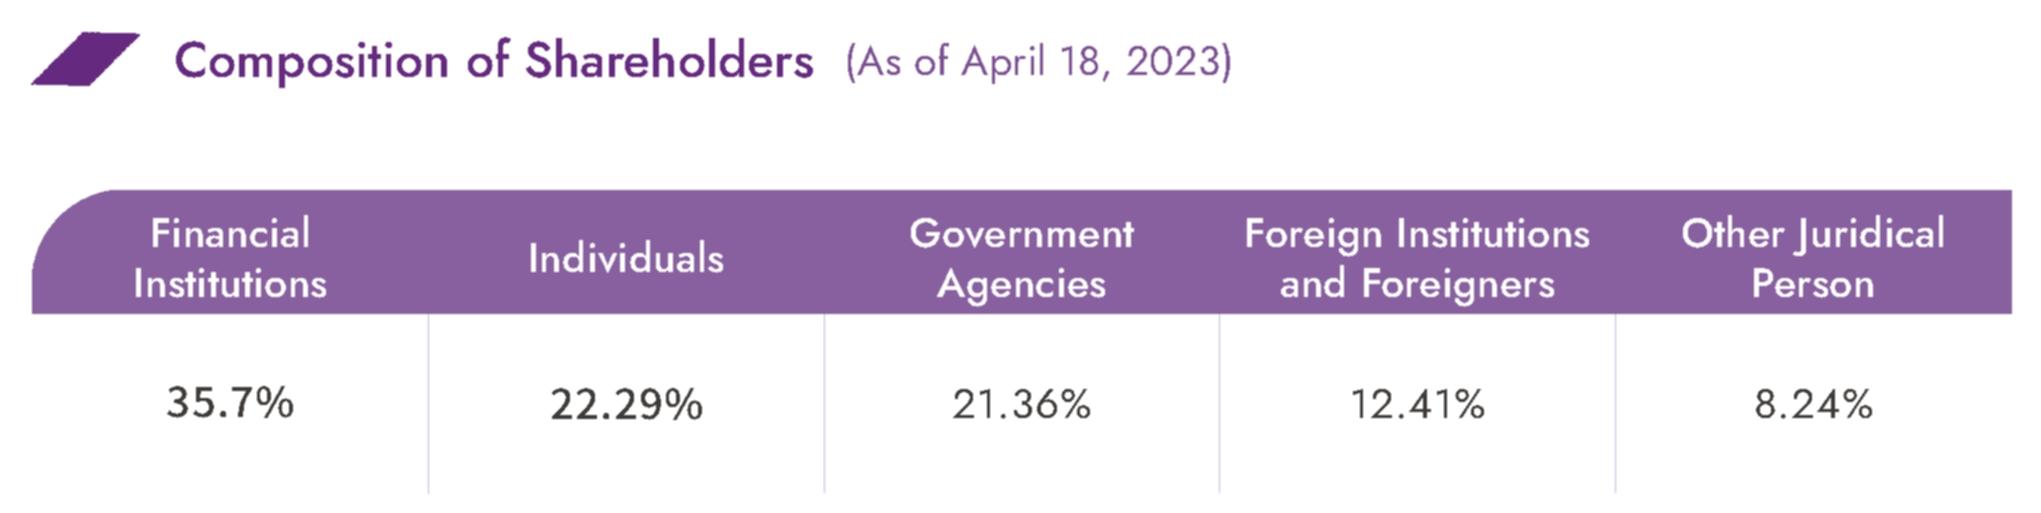 Composition of Shareholders (As of April 18, 2023)